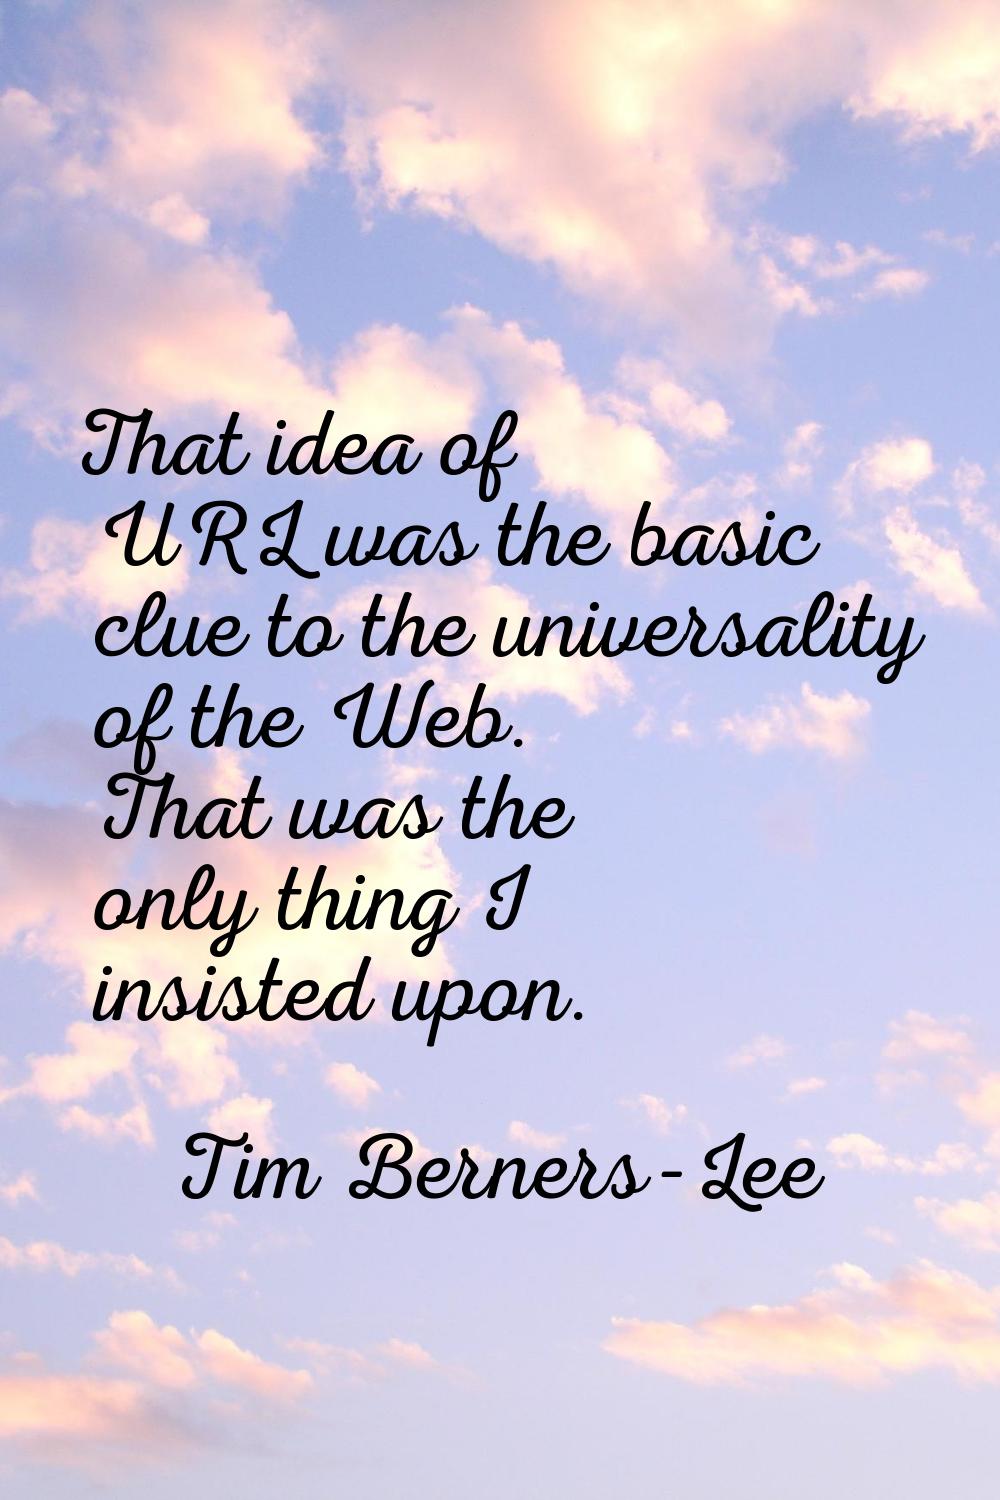 That idea of URL was the basic clue to the universality of the Web. That was the only thing I insis